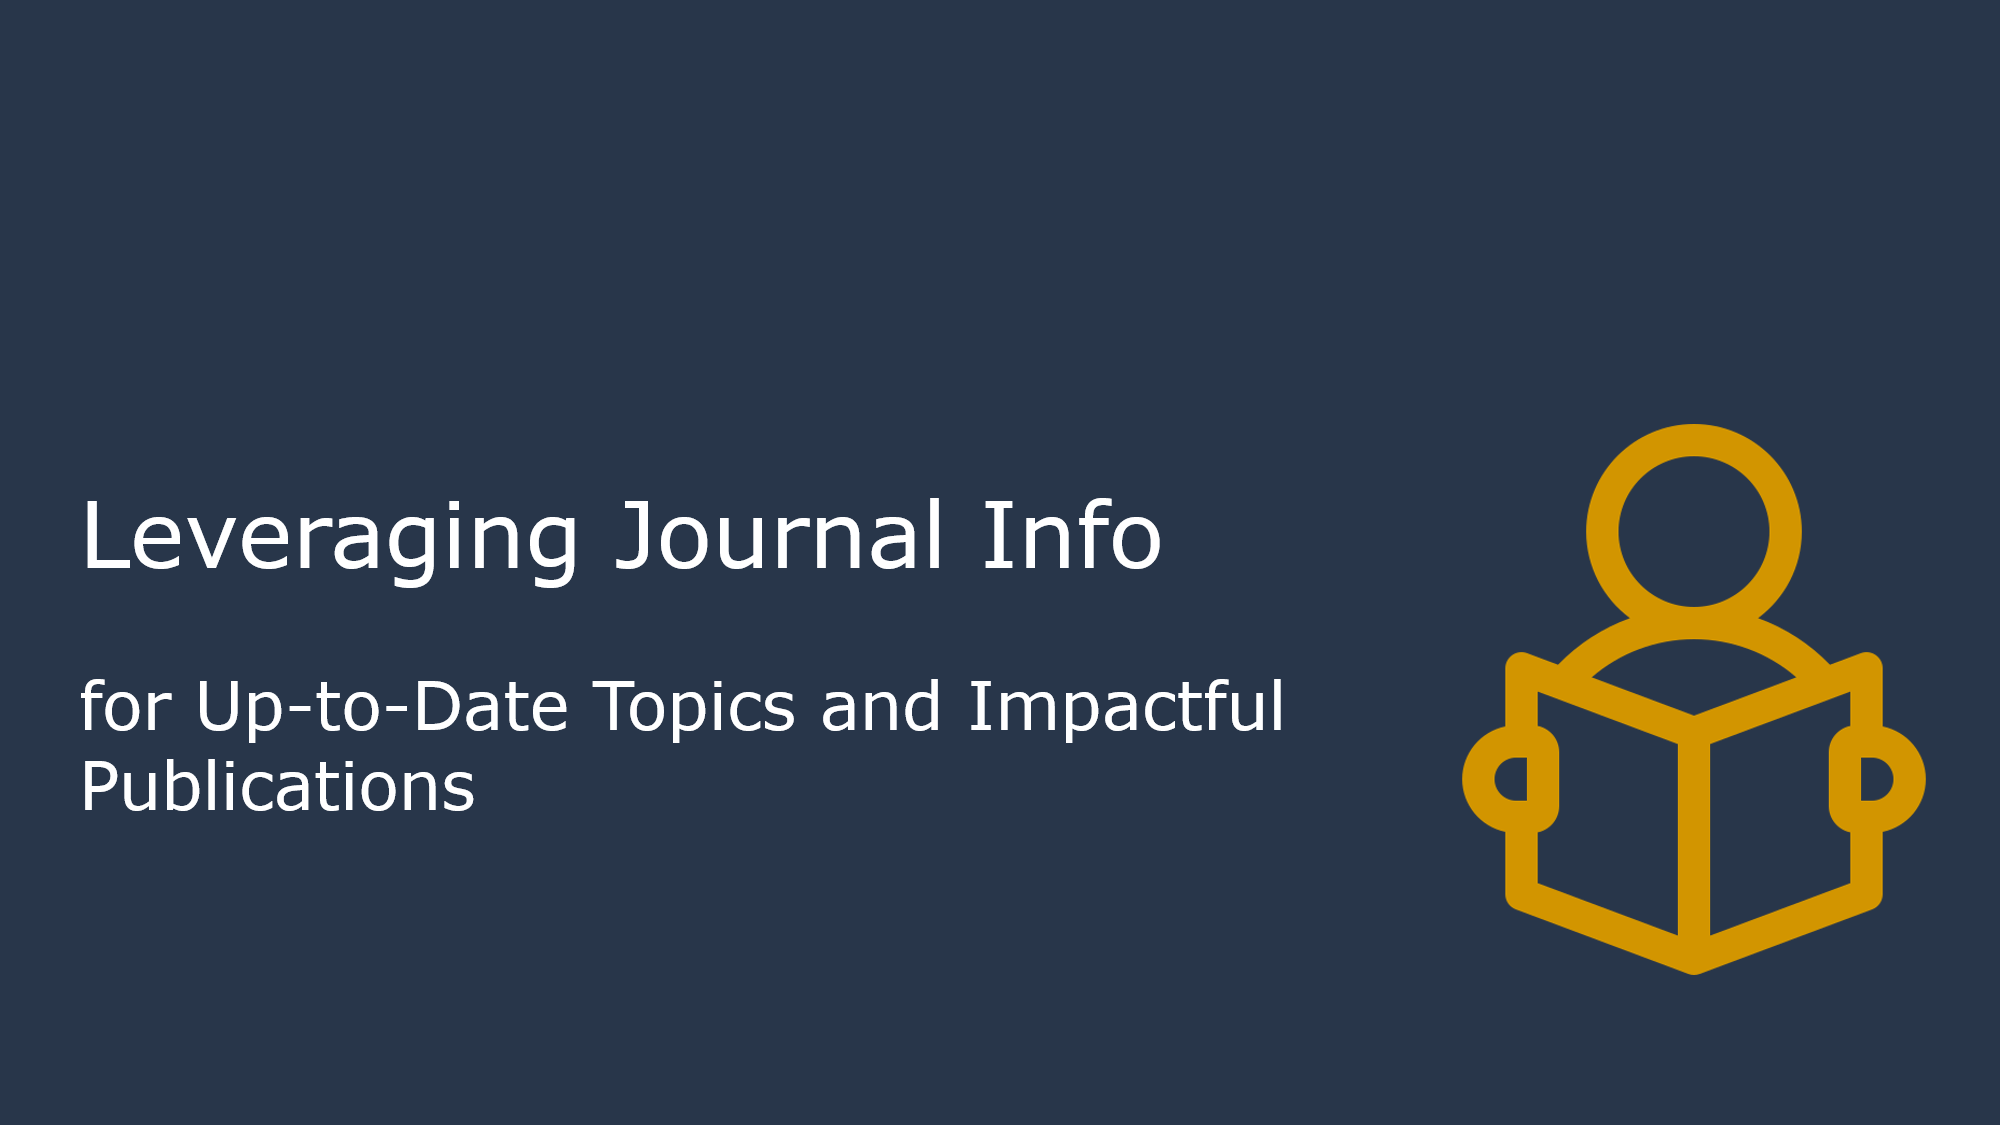 Leveraging Journal Information for Up-to-Date Topics and Impactful Publications